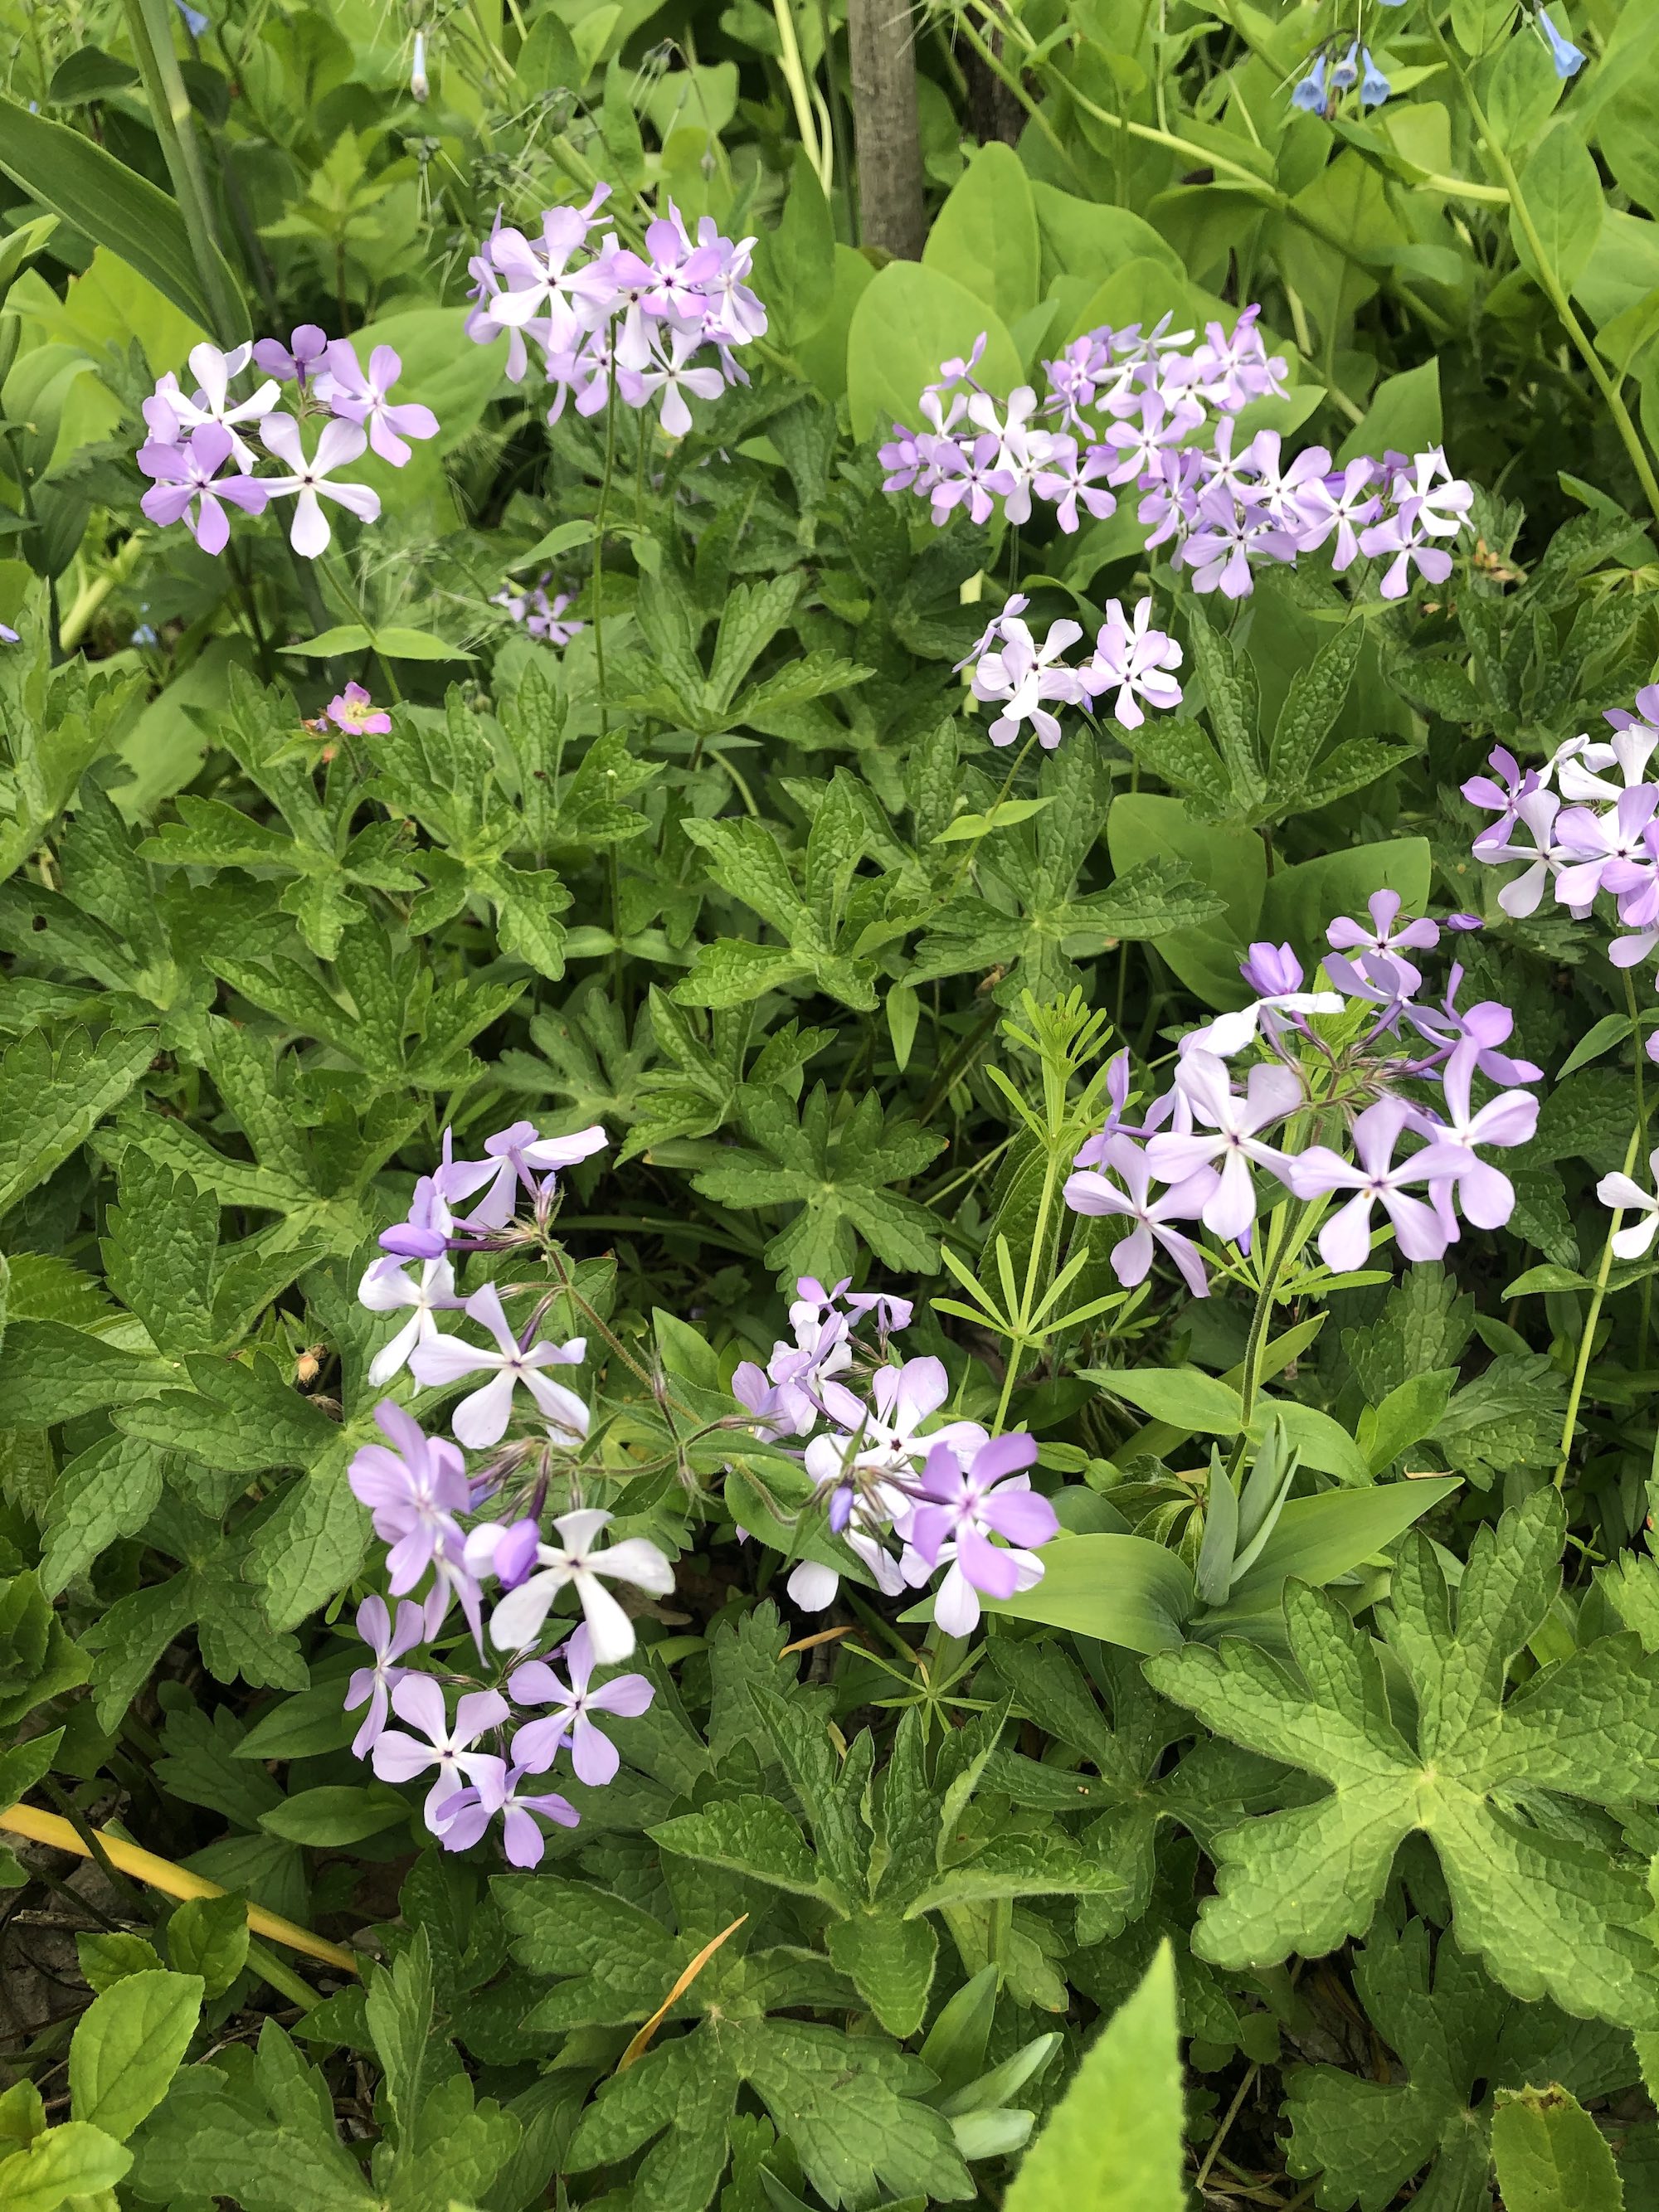 Woodland Phlox by Duck Pond on May 7, 2021.